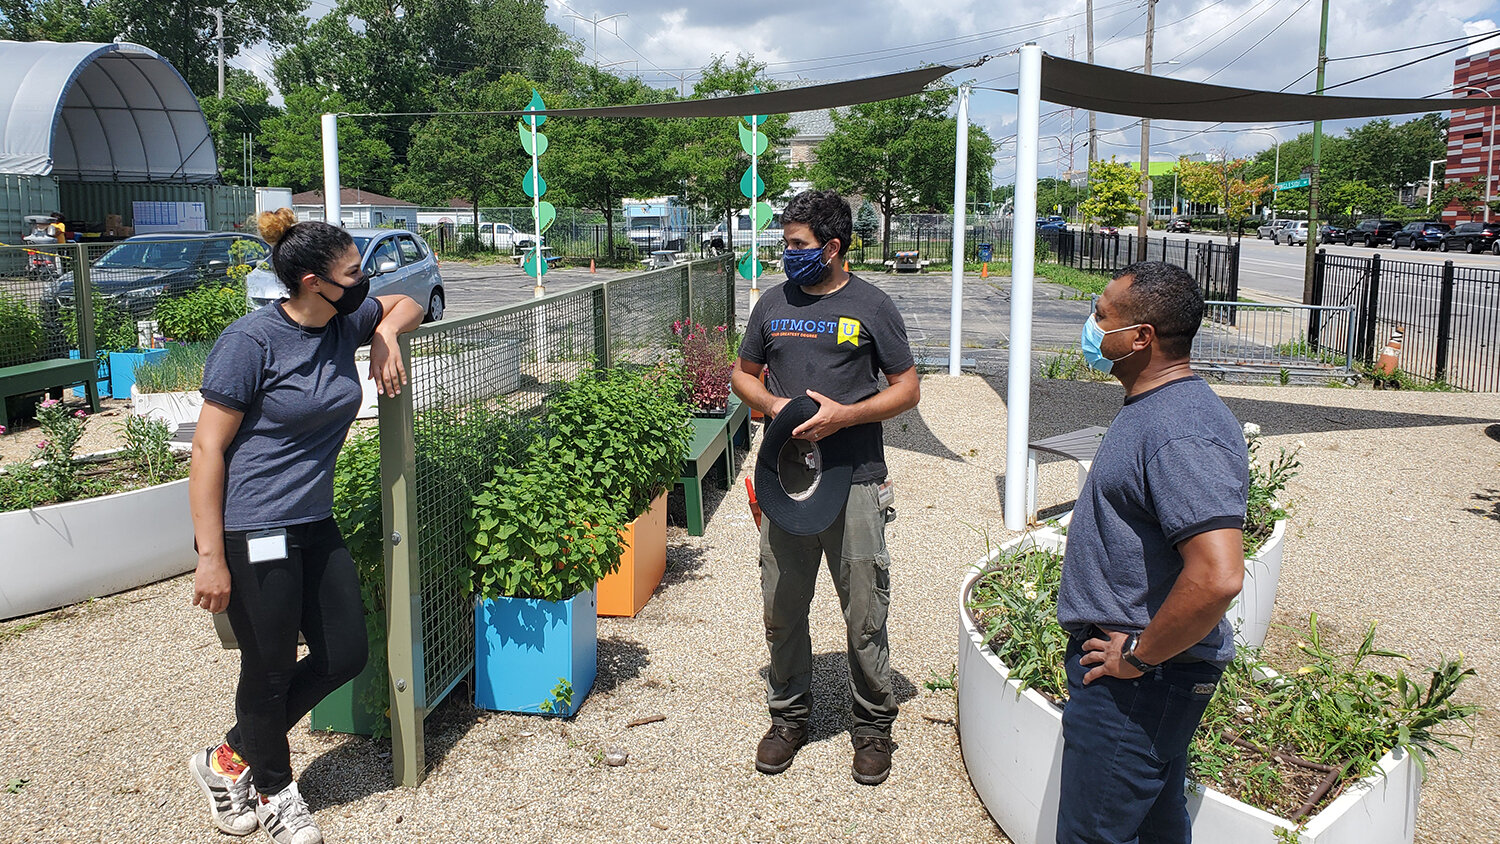  Gary Comer Youth Center is a self-sponsored Child and Adult Care Food Program and Summer Service Food Program site. It currently grows produce on its nearly 2-acre urban farm providing weekly donations of fresh, organic food to local food pantries a